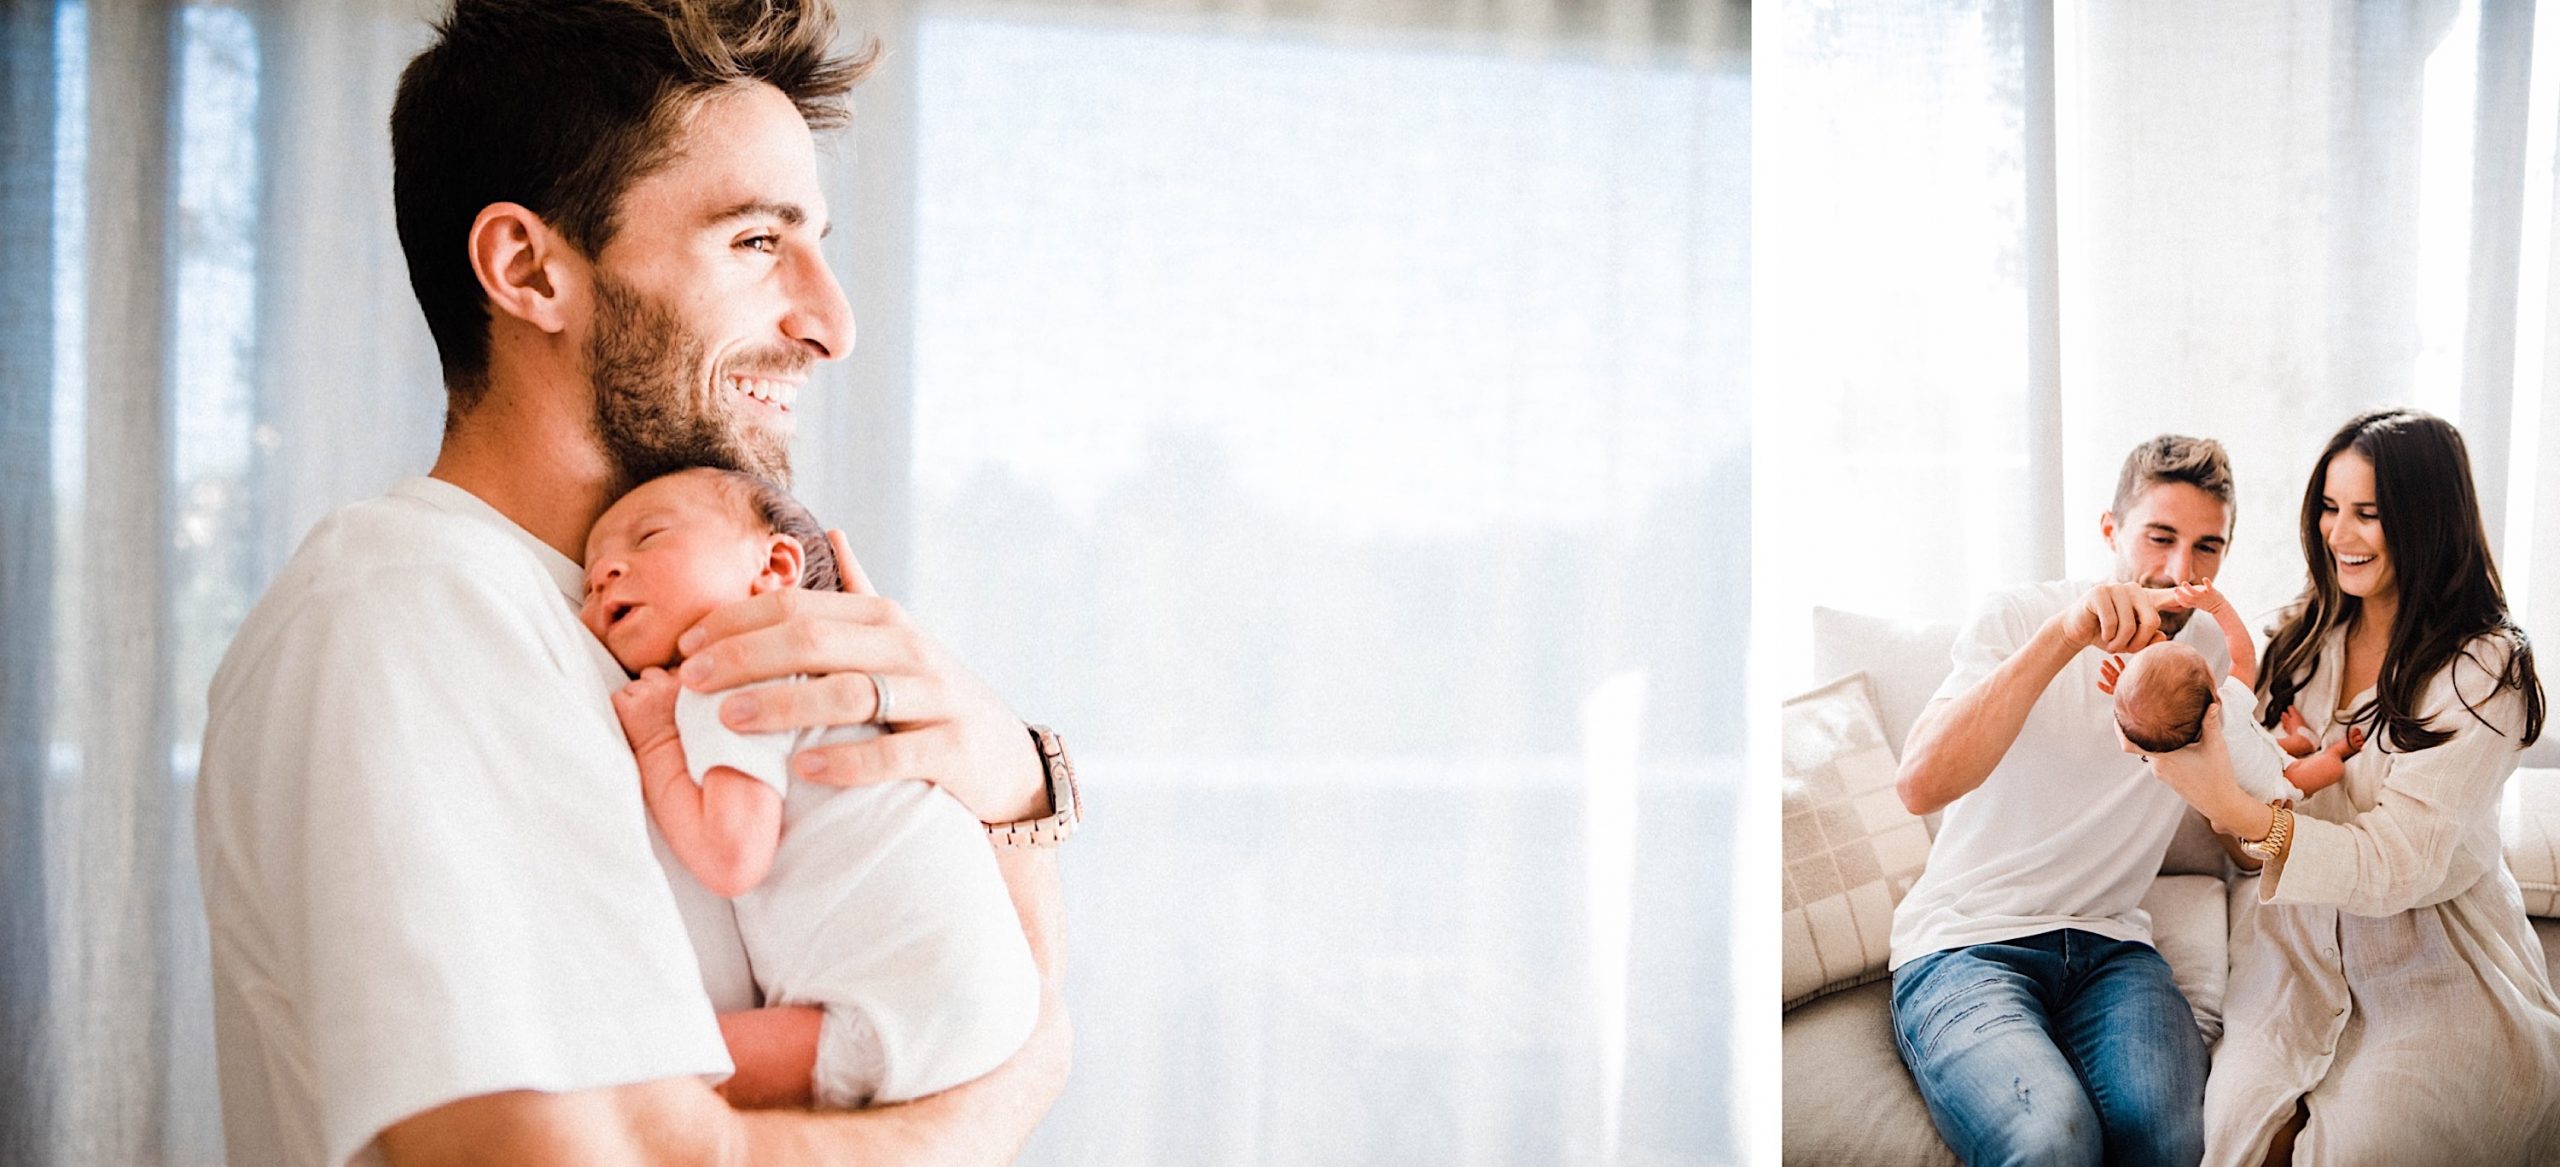 Two Natural Newborn Portraits side by side. Left: a side profile of the Dad, Fabio Borini, holding his baby and smiling. On the right, Mum & Dad sit on their couch, smiling and laughing at the baby.